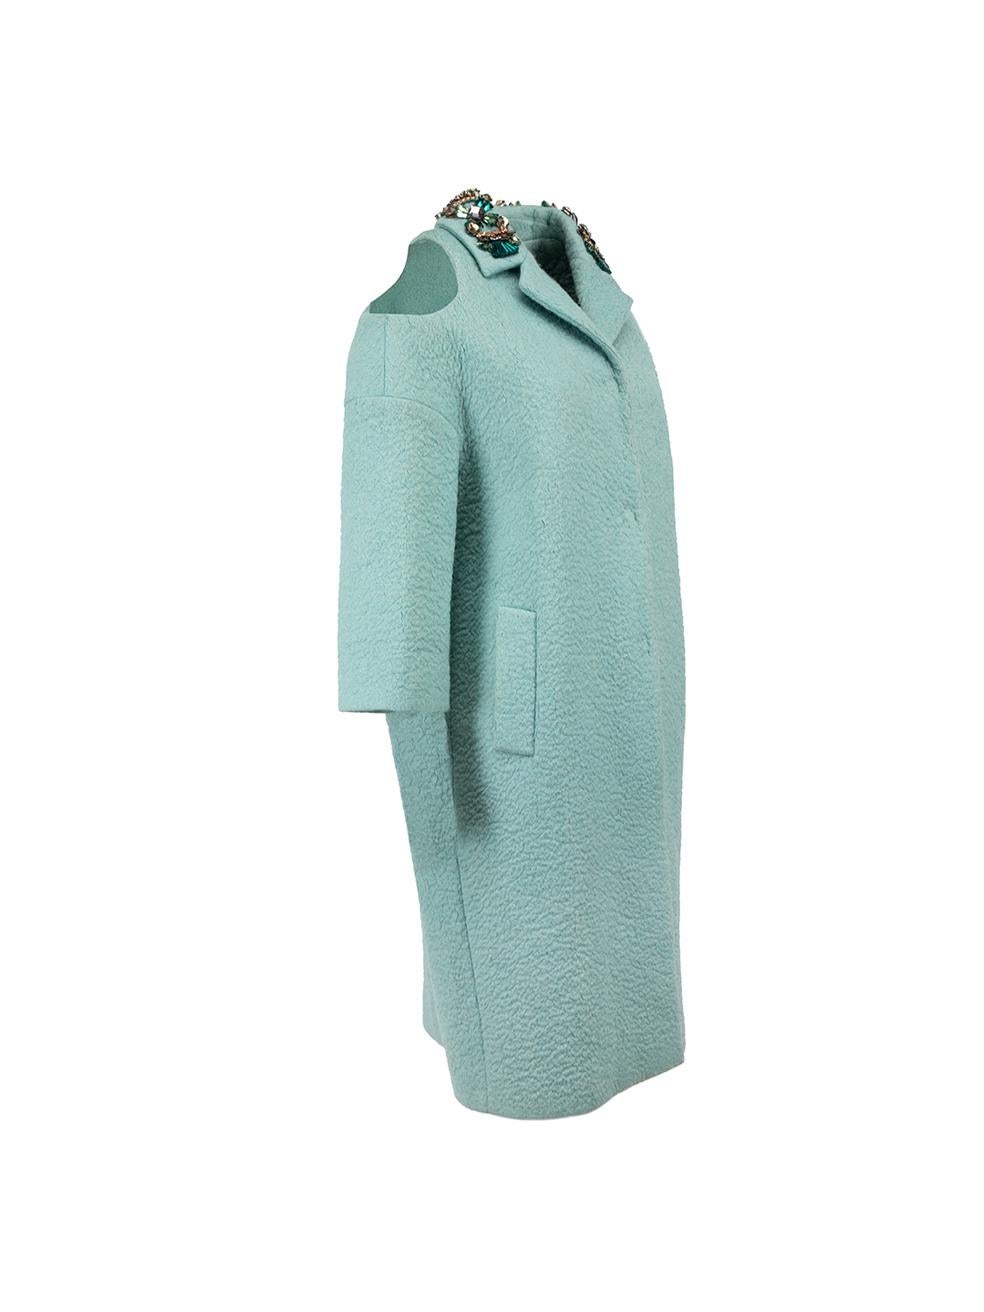 CONDITION is Very good. General wear along interior labels on this used Anya Hindmarch designer resale item. This item comes with garment bags.



Details


Light turquoise

Wool

Long coat

Front snap buttons closure

Cold shoulder